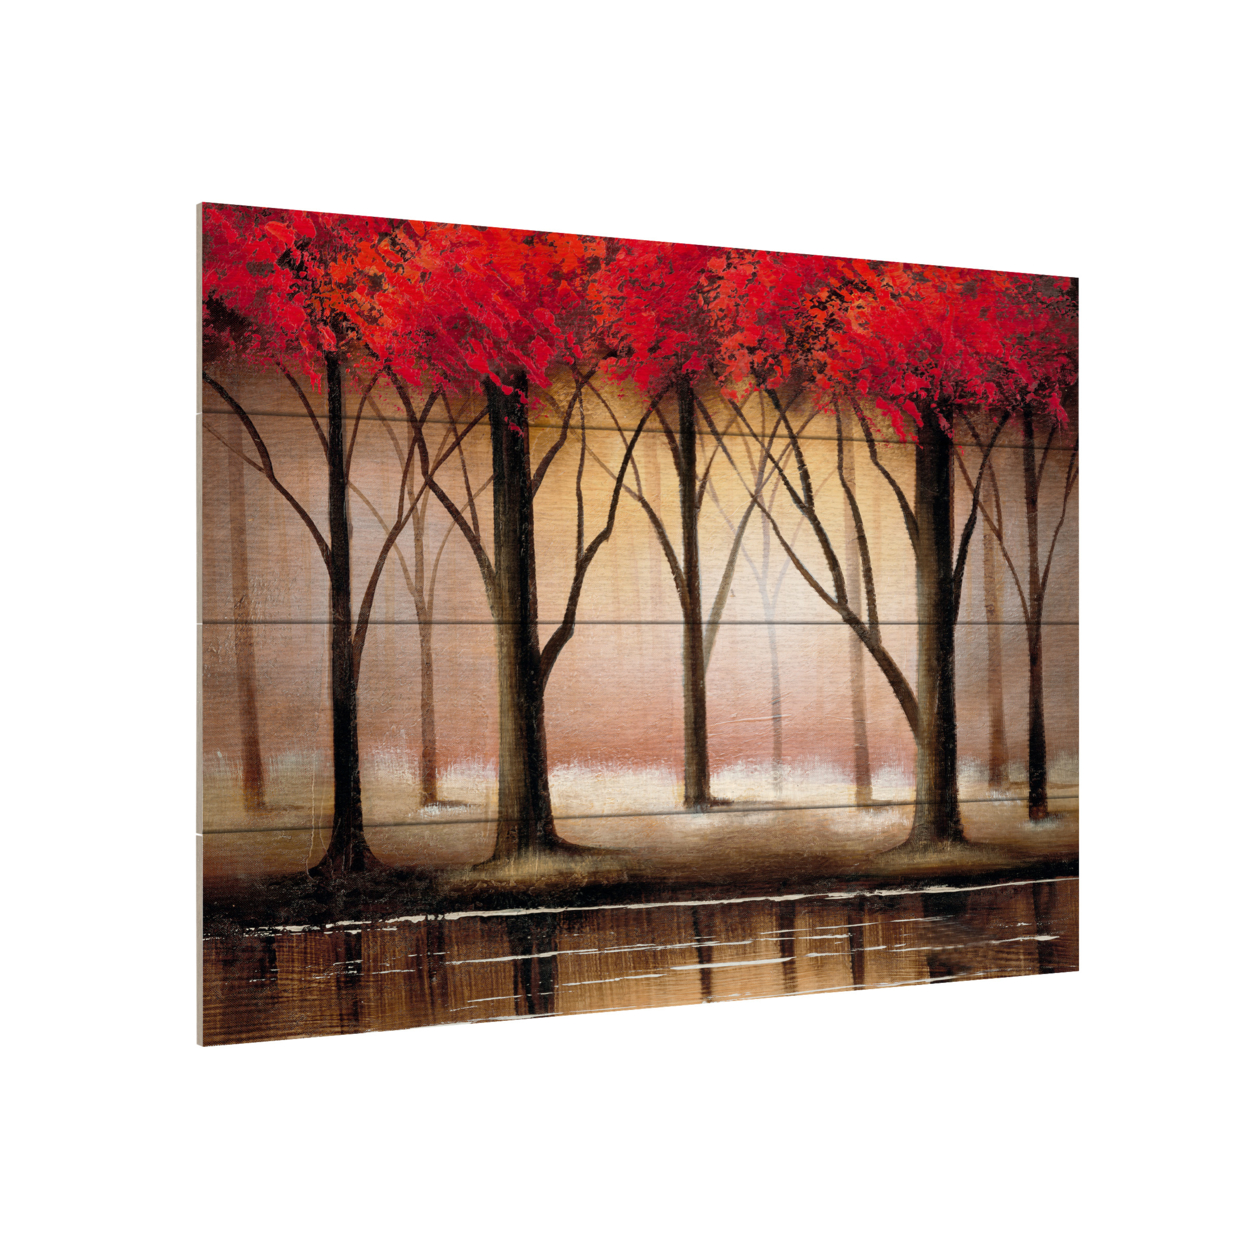 Wall Art 12 X 16 Inches Titled Serenade In Red Ready To Hang Printed On Wooden Planks